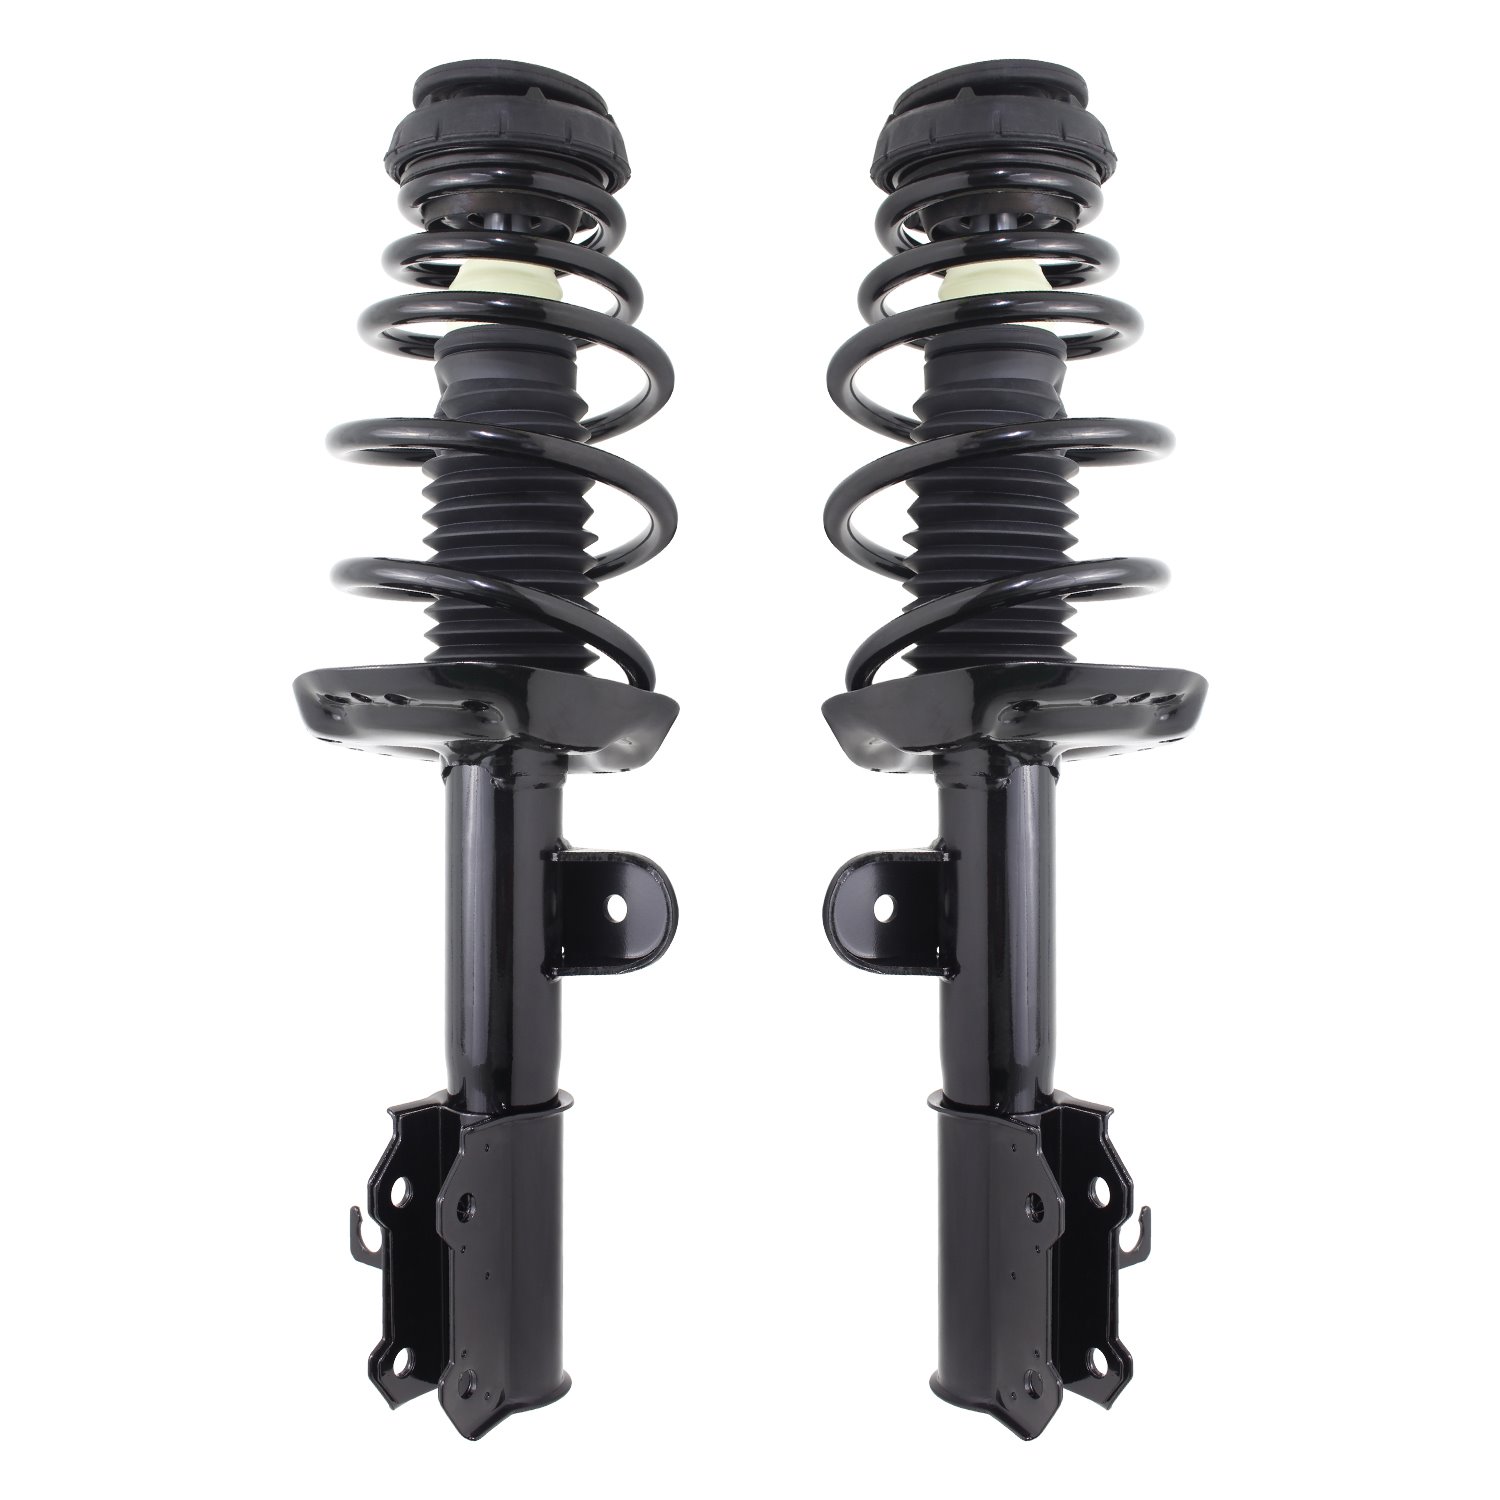 2-11051-11052-001 Suspension Strut & Coil Spring Assembly Set Fits Select Buick Verano